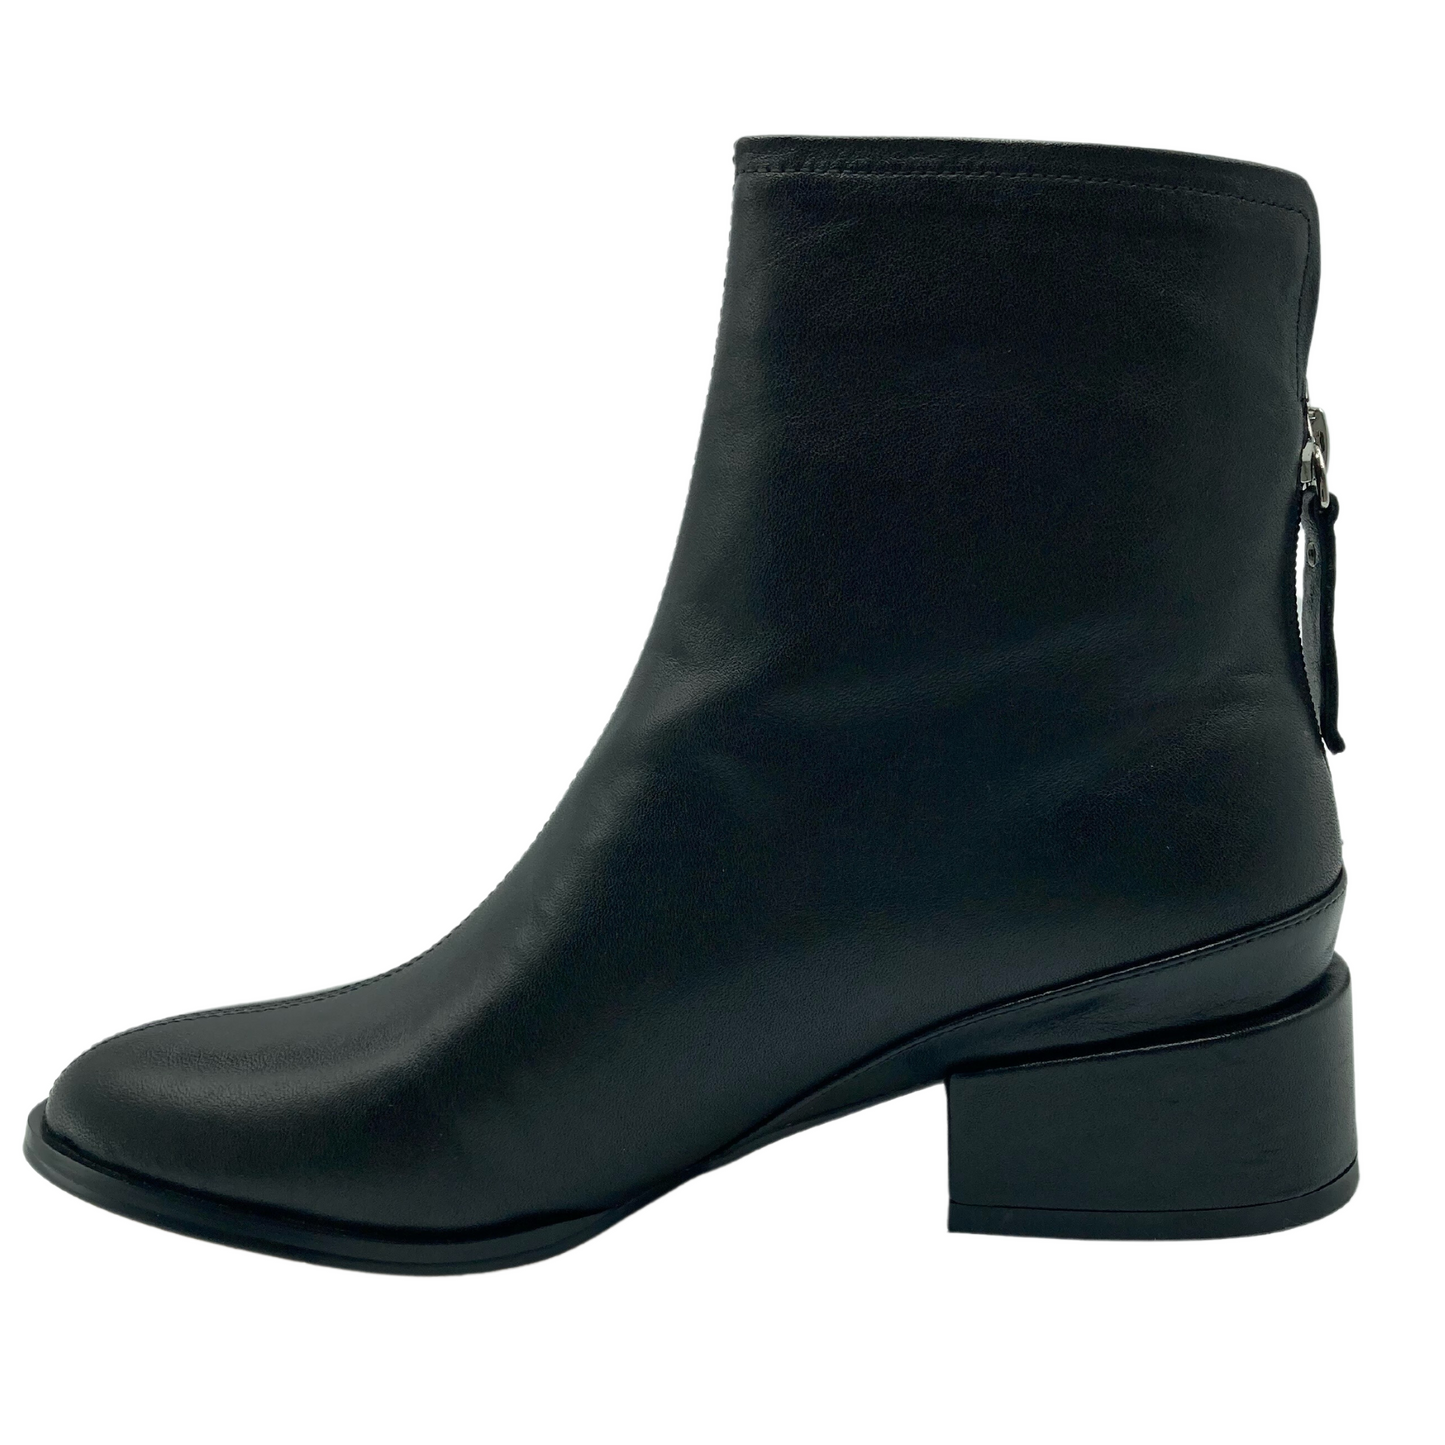 Left facing view of short, black, leather, ankle boot with block heel and back zipper entry